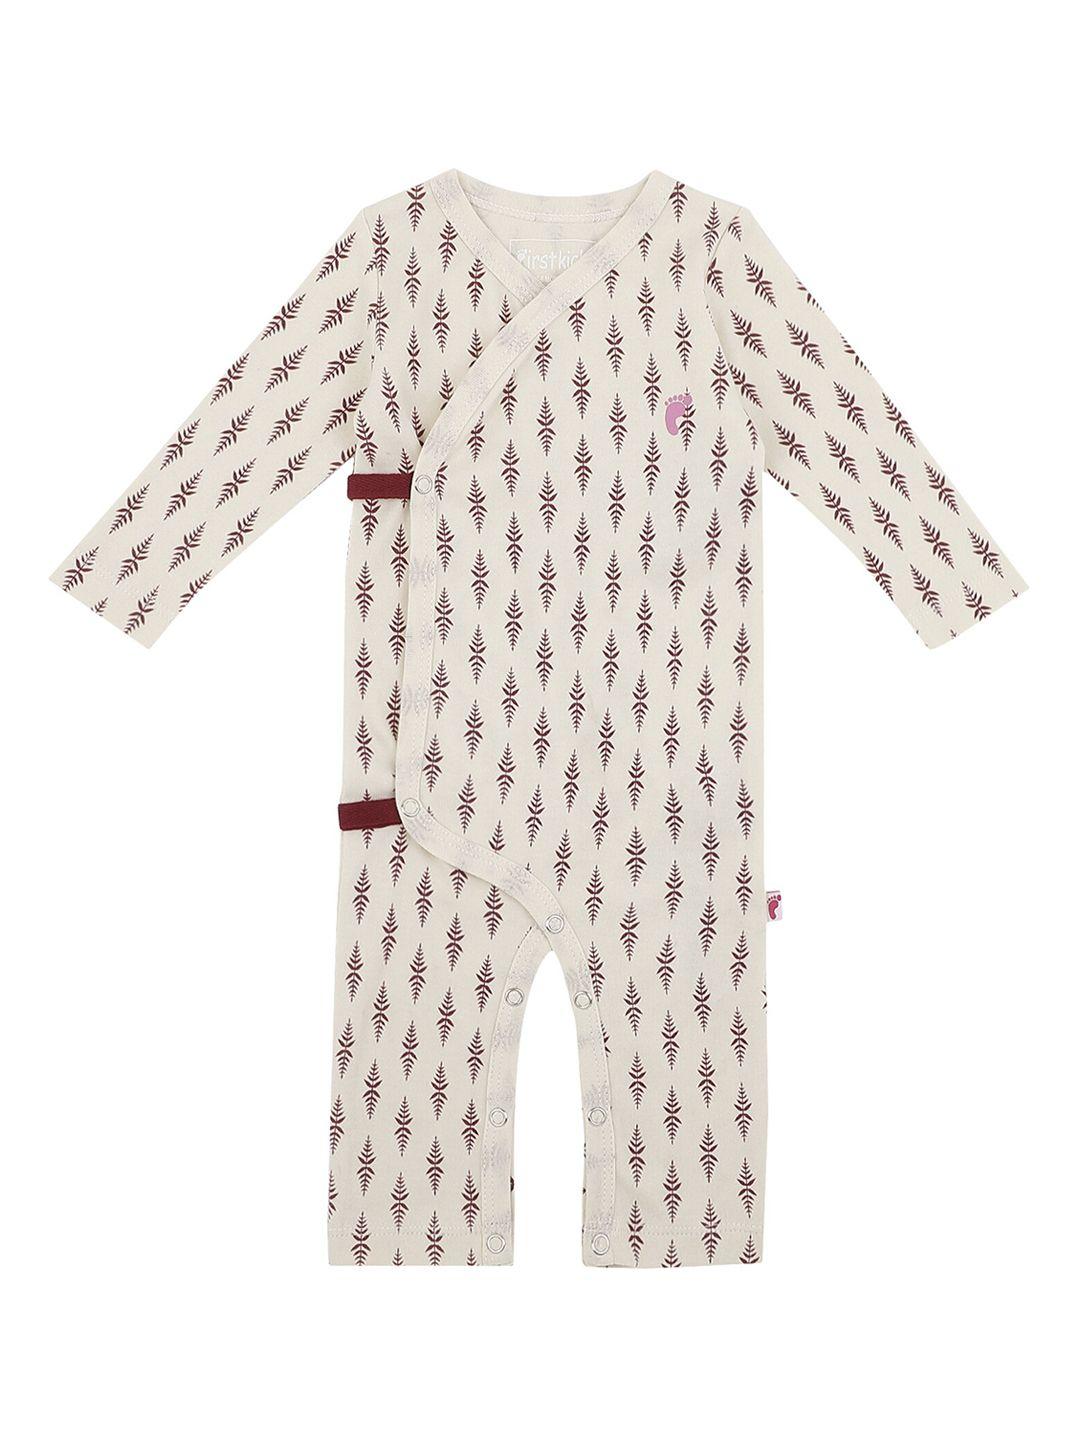 first-kick-kids-off-white-&-maroon-printed-cotton-rompers